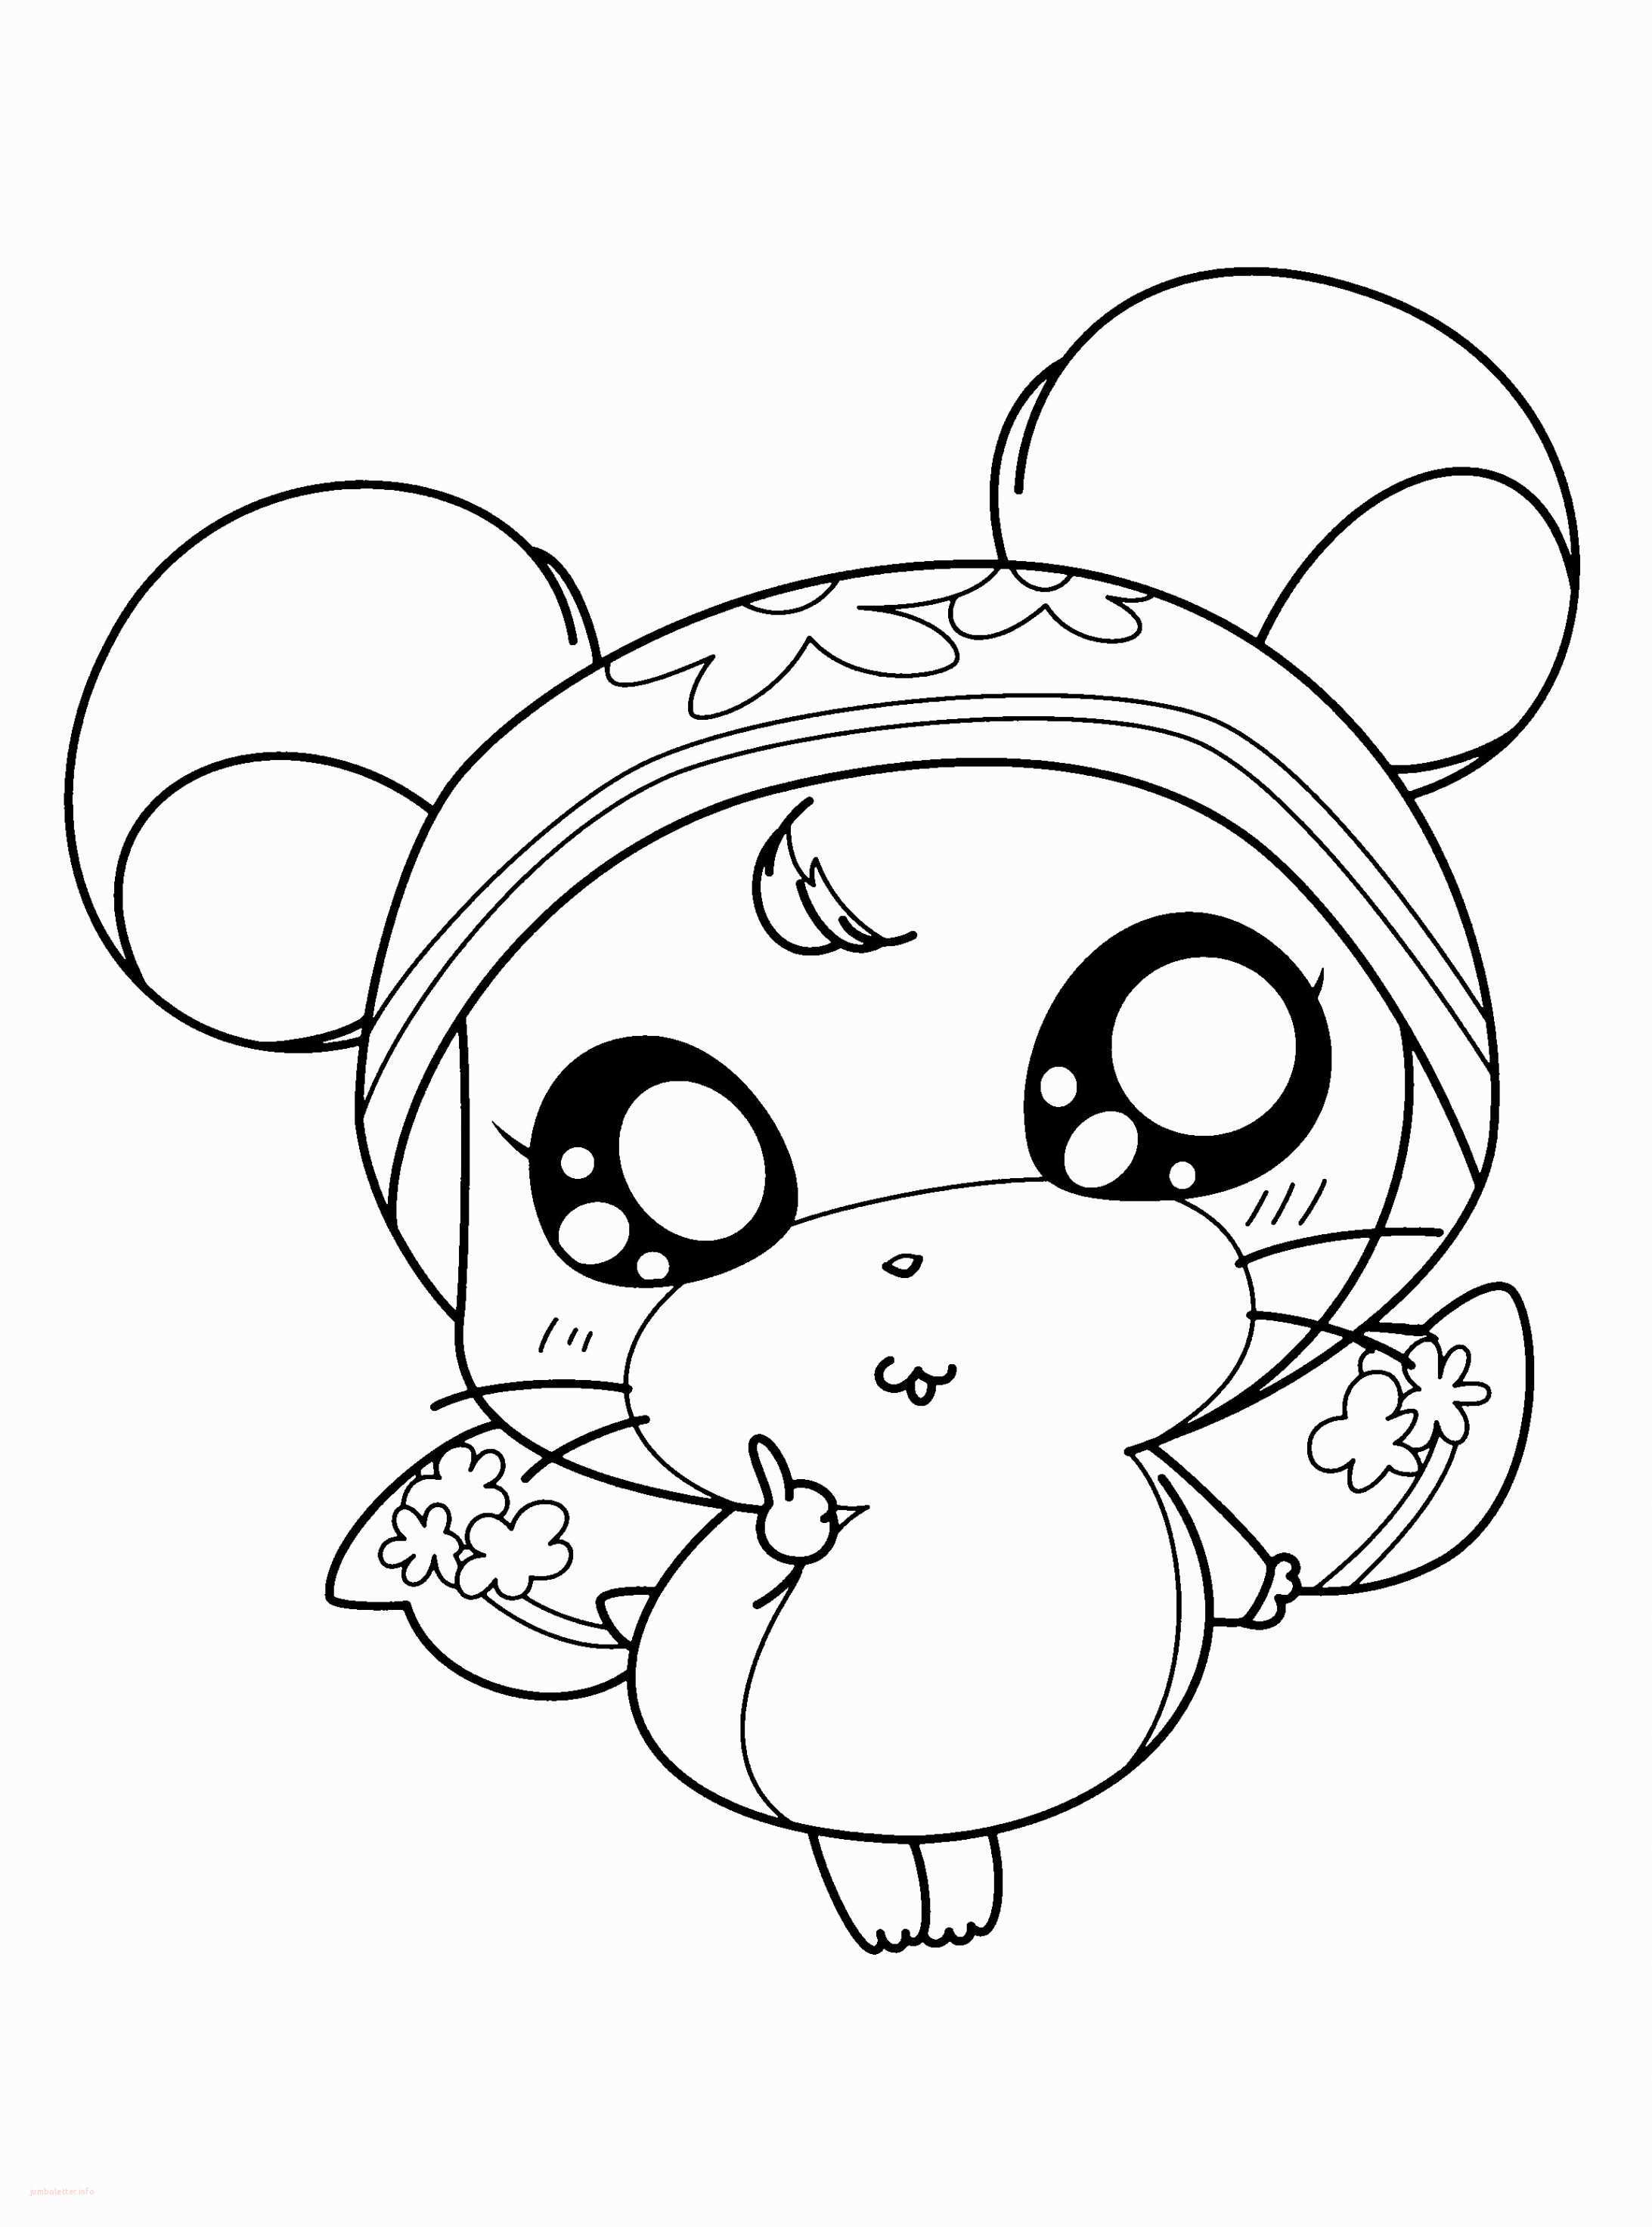 Coloring Pages Online To Print Frog Coloring Pages To Print Elegant Princess And The Frog Printable